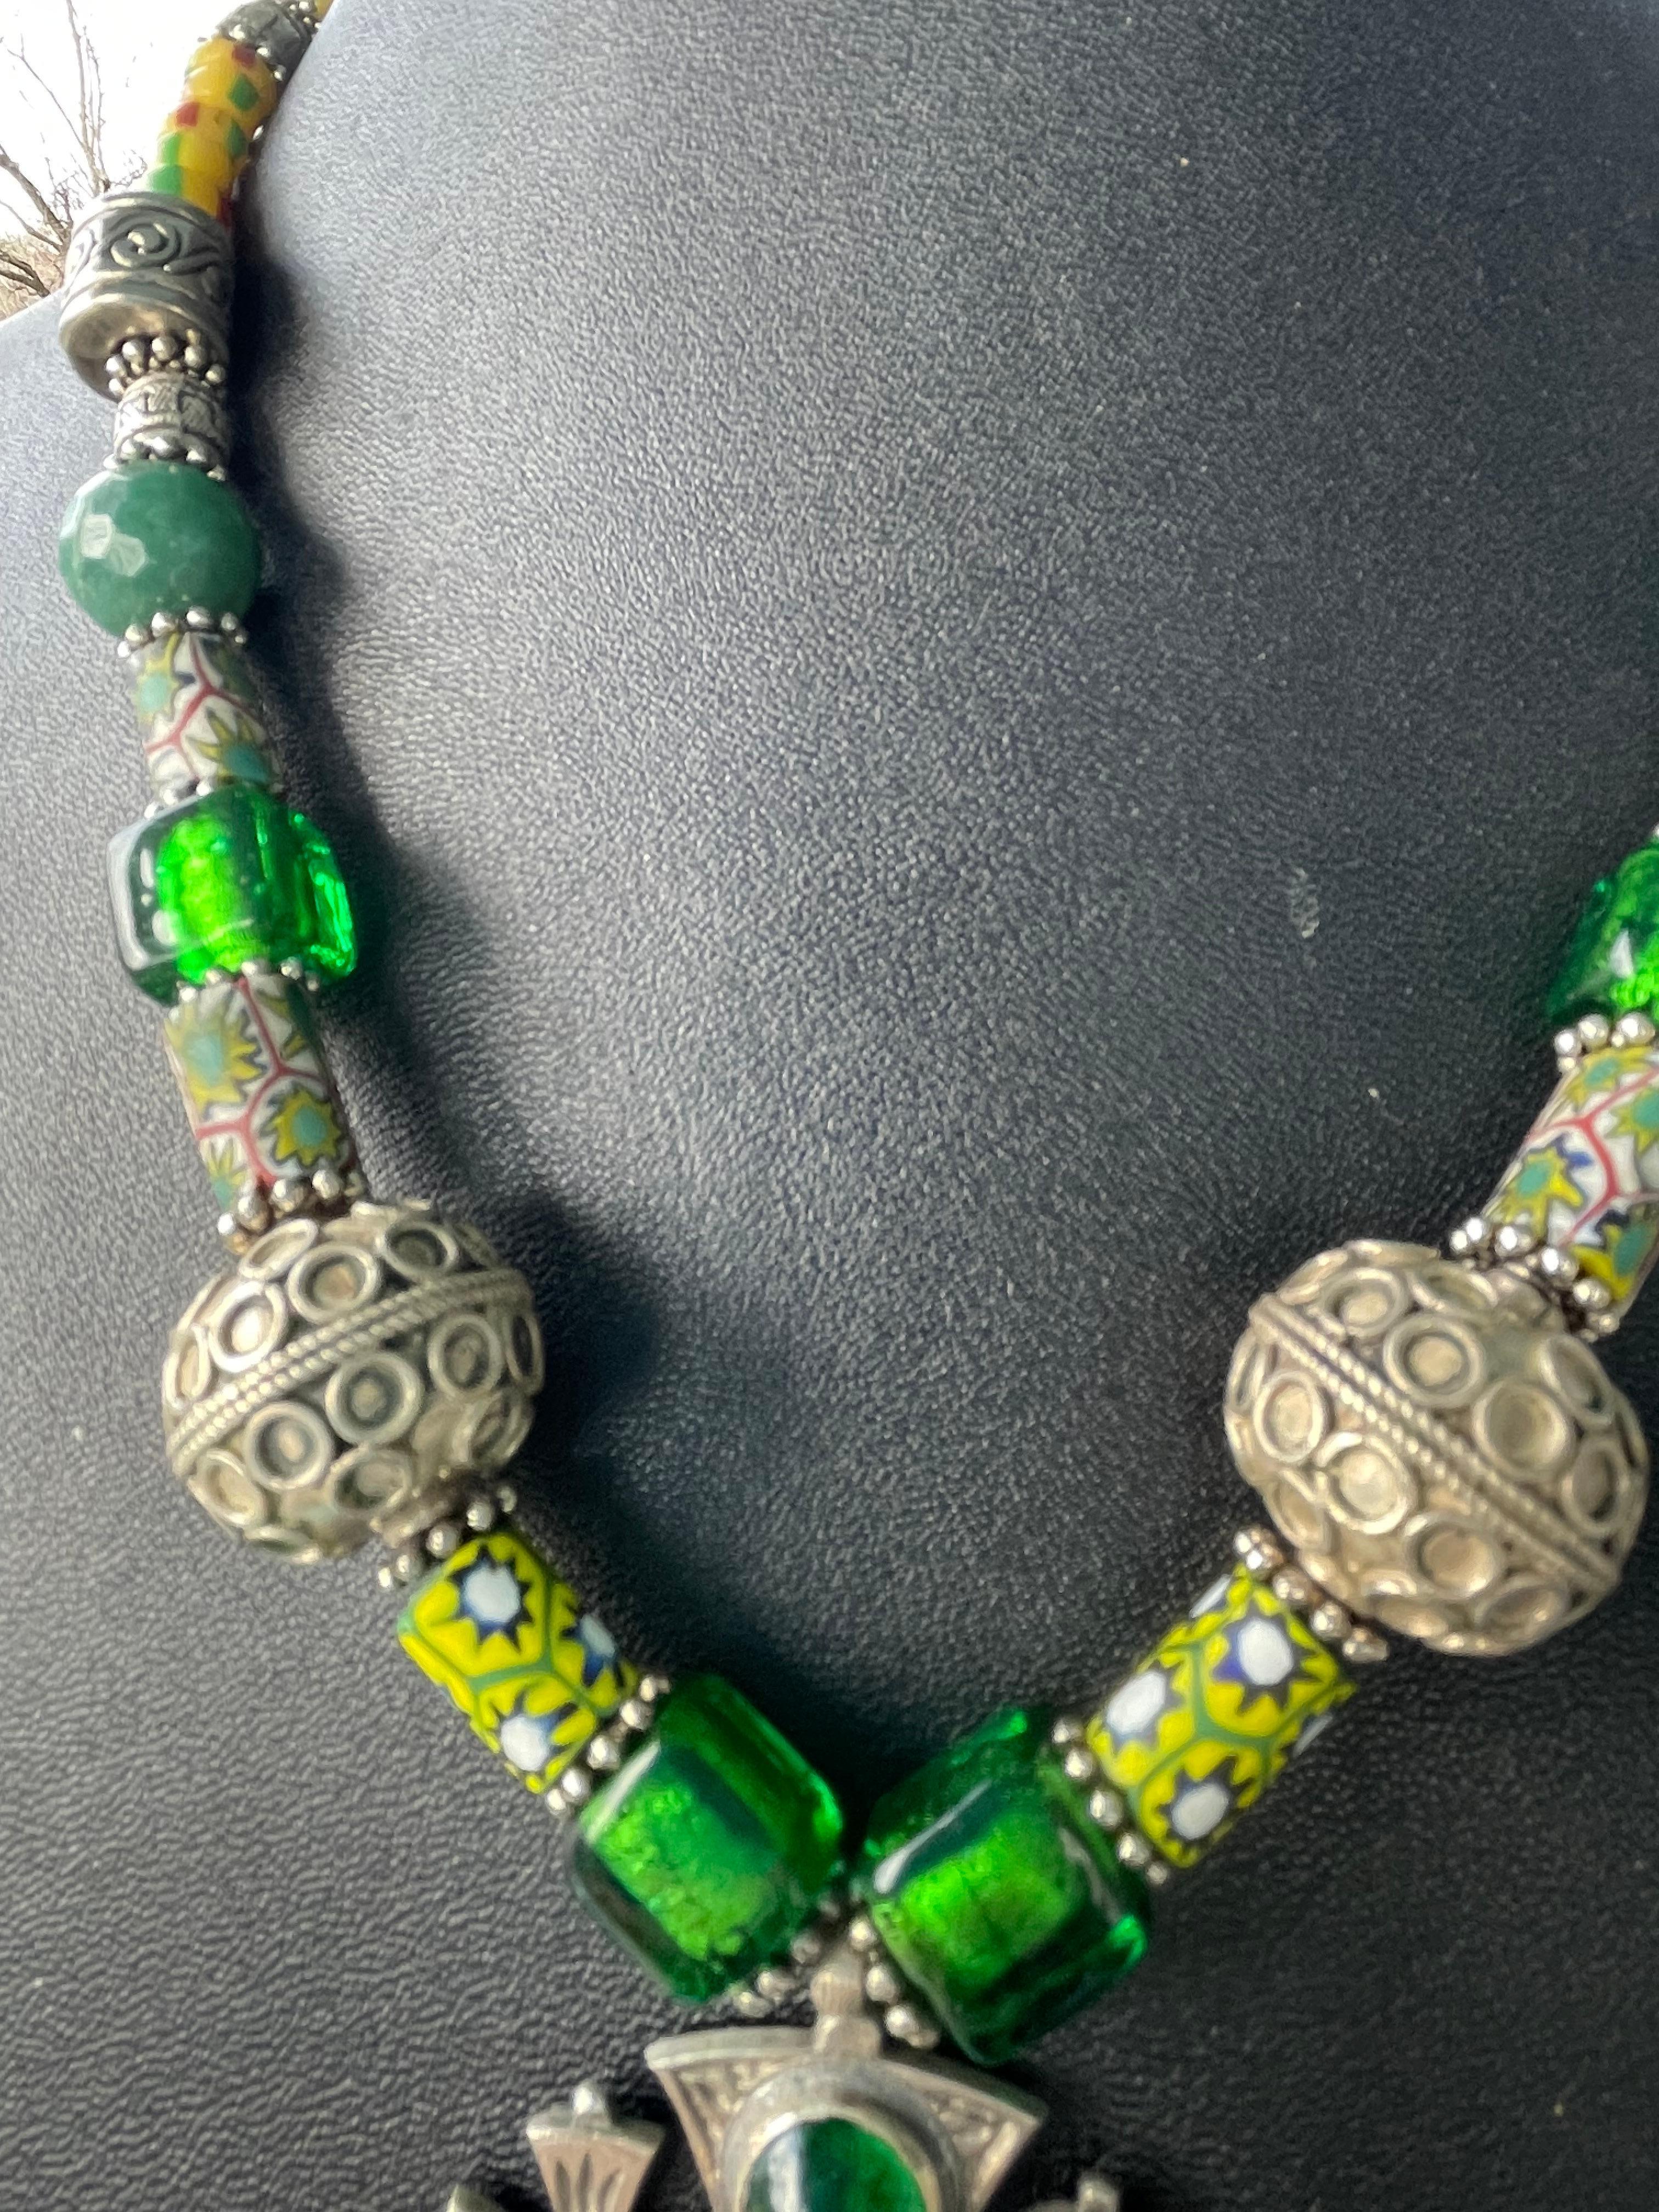 Lorraine’s Bijoux offers a stunning Vintage, Sterling Silver Jerusalem cross with glass cabachons pendant necklace. This wonderful piece also features new green glass Venetian beads, vintage Venetian Mille Fiore beads, Large Tibetan silver beads,